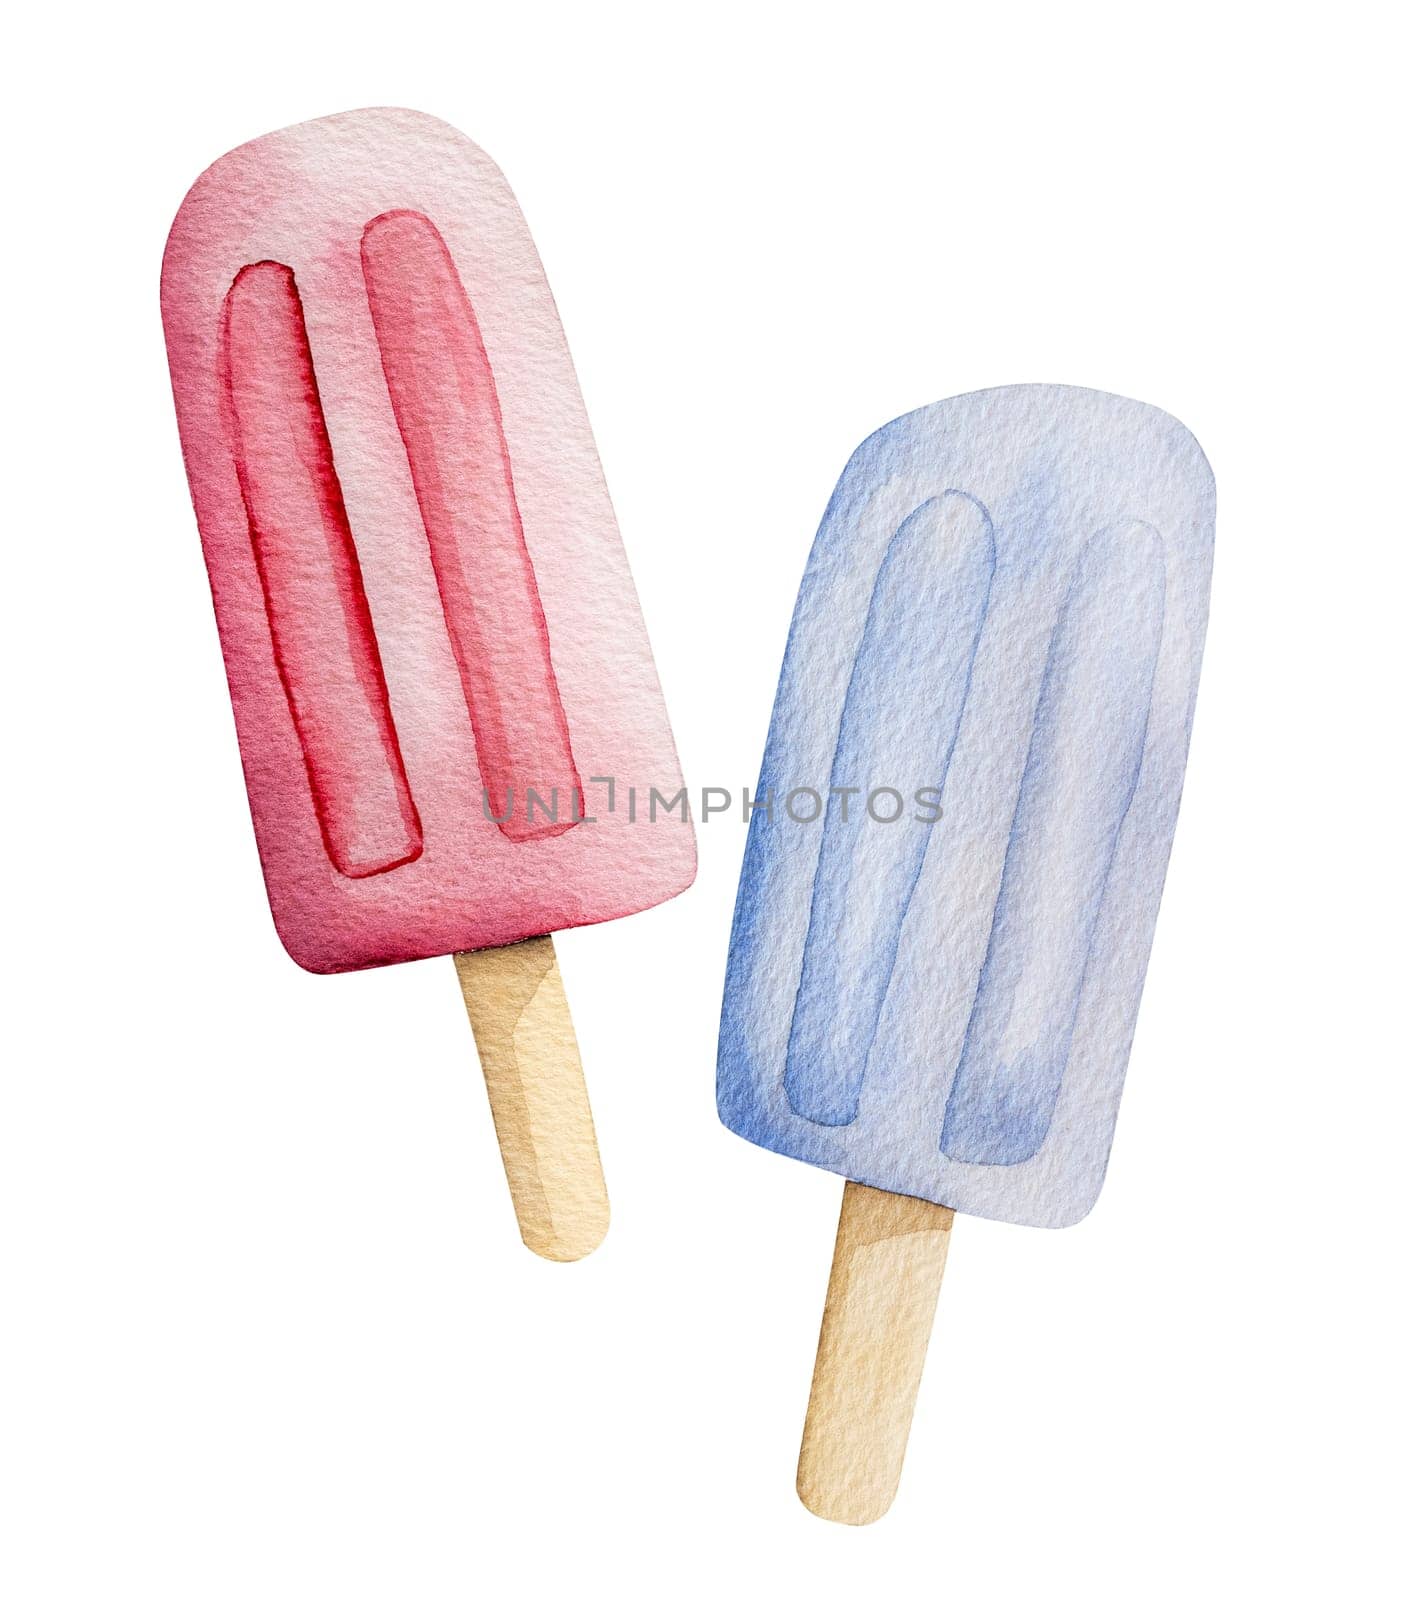 Hand-Painted Watercolor Of Two Servings Of Pink And Blue Popsicles by tan4ikk1